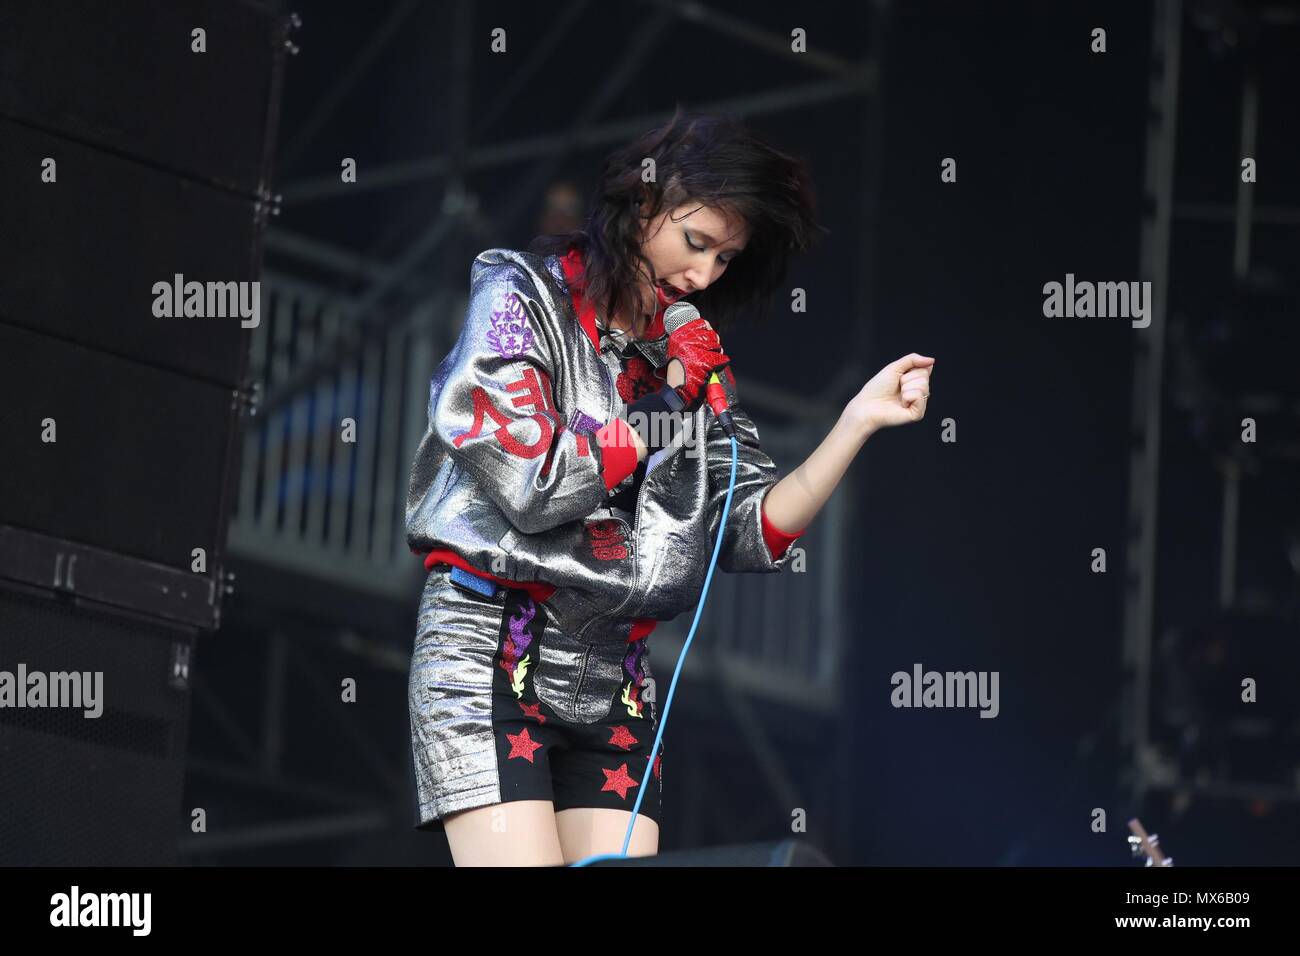 New York, NY, USA. 1st June, 2018. Karen O and The Yeah Yeah Yeahs on stage for 2018 Governors Ball Music Festival - FRI, Randall's Island Park, New York, NY June 1, 2018. Credit: Rob Kim/Everett Collection/Alamy Live News Stock Photo